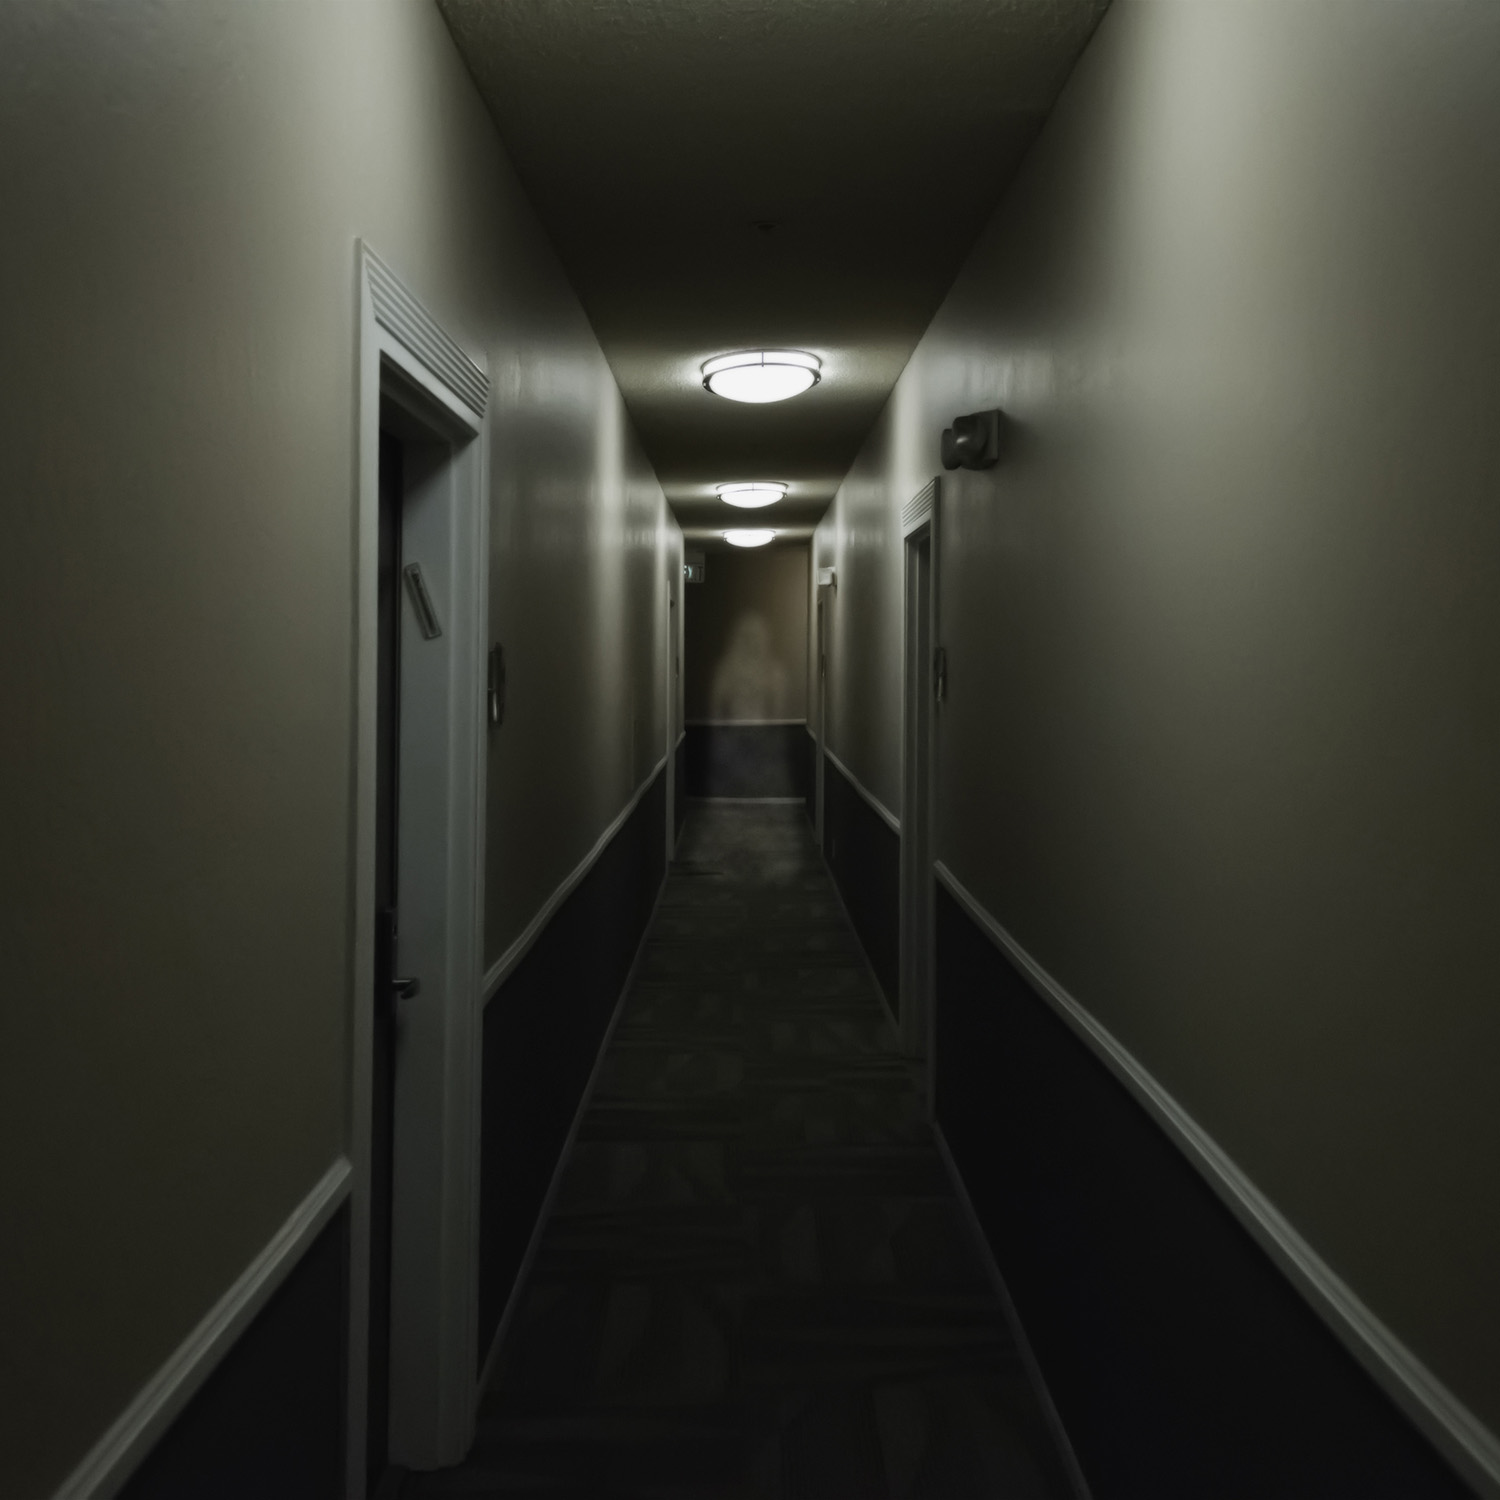 Ghost in the Hallway